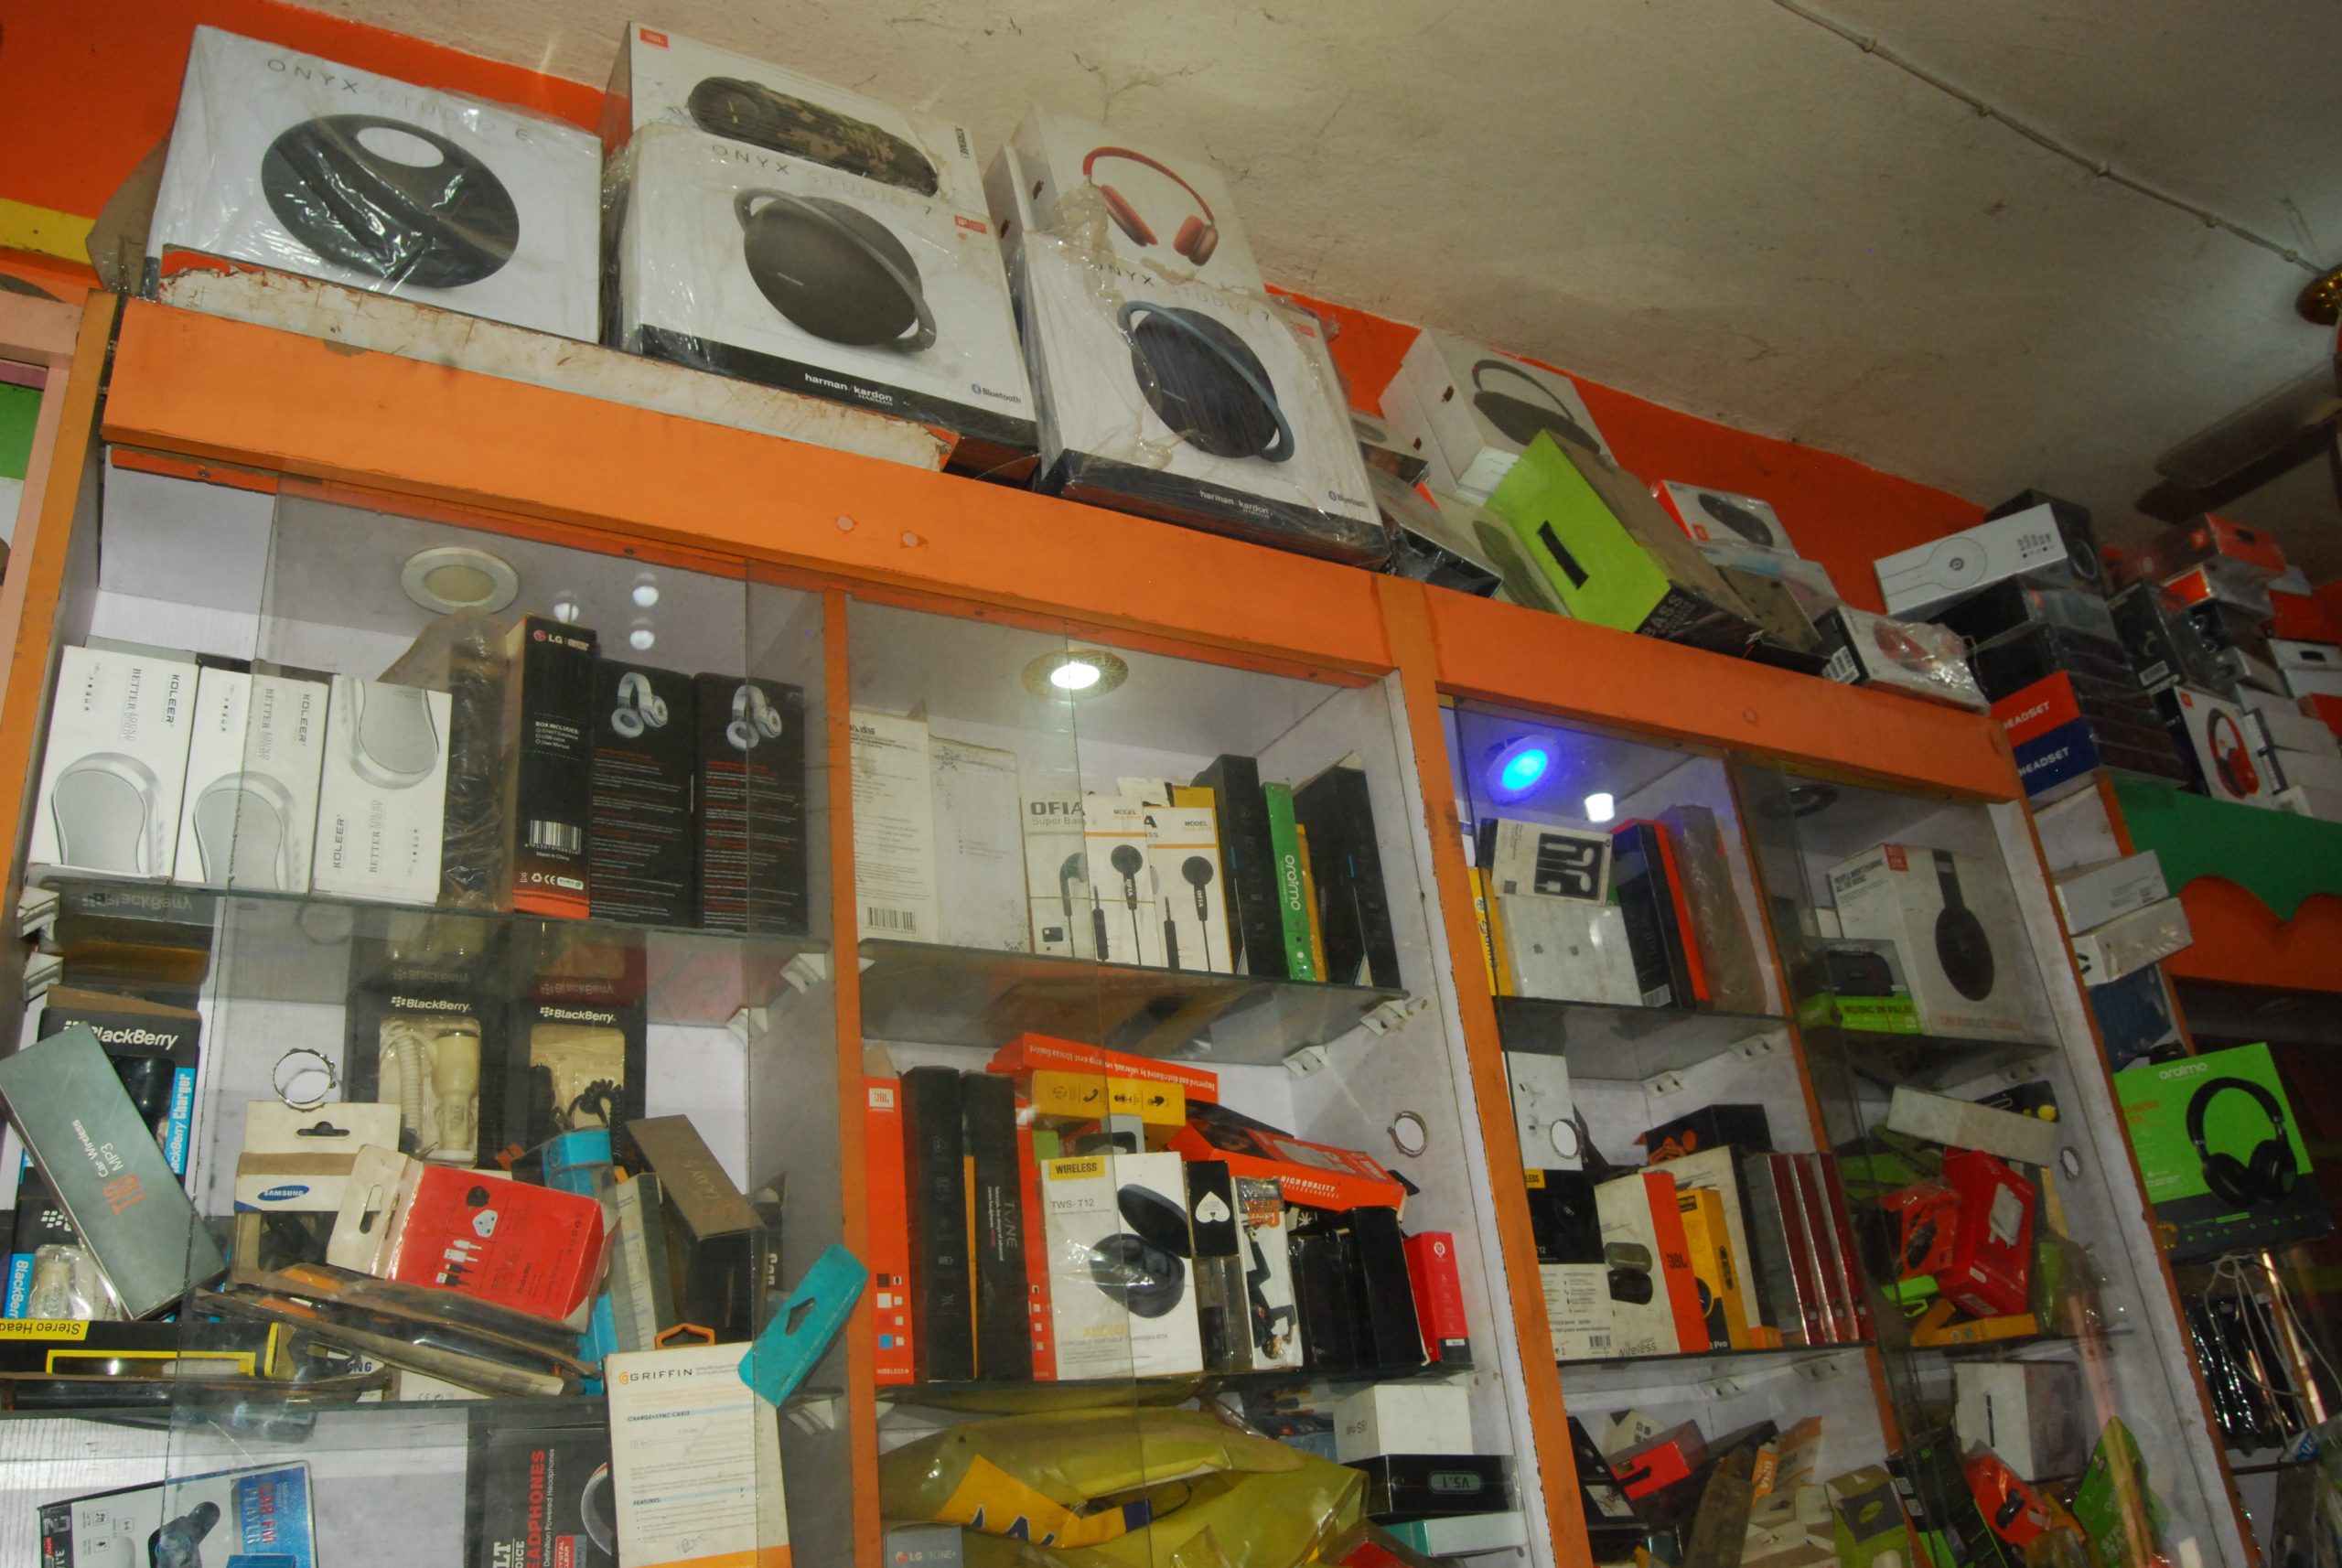 STATELIGHT COMMUNICATION  PHONES AND ACCESSORIES,NNEWI.